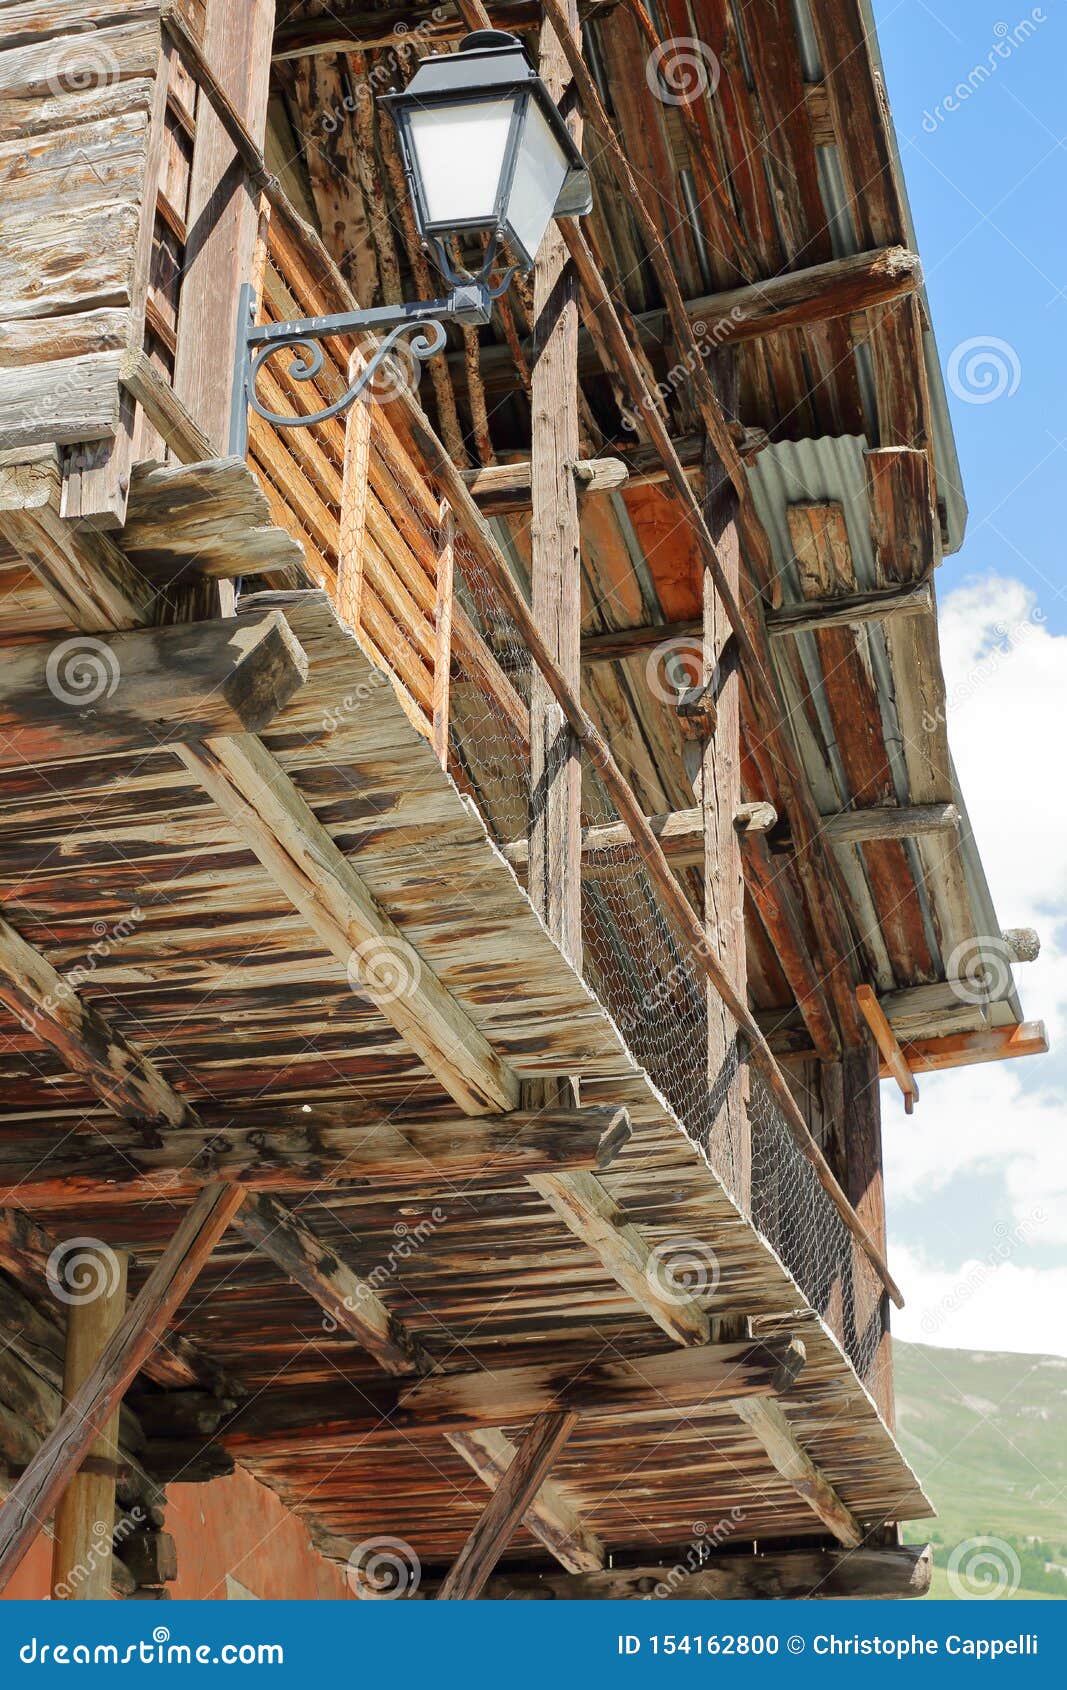 close-up on a traditional wooden house with its traditional balcony in saint veran village